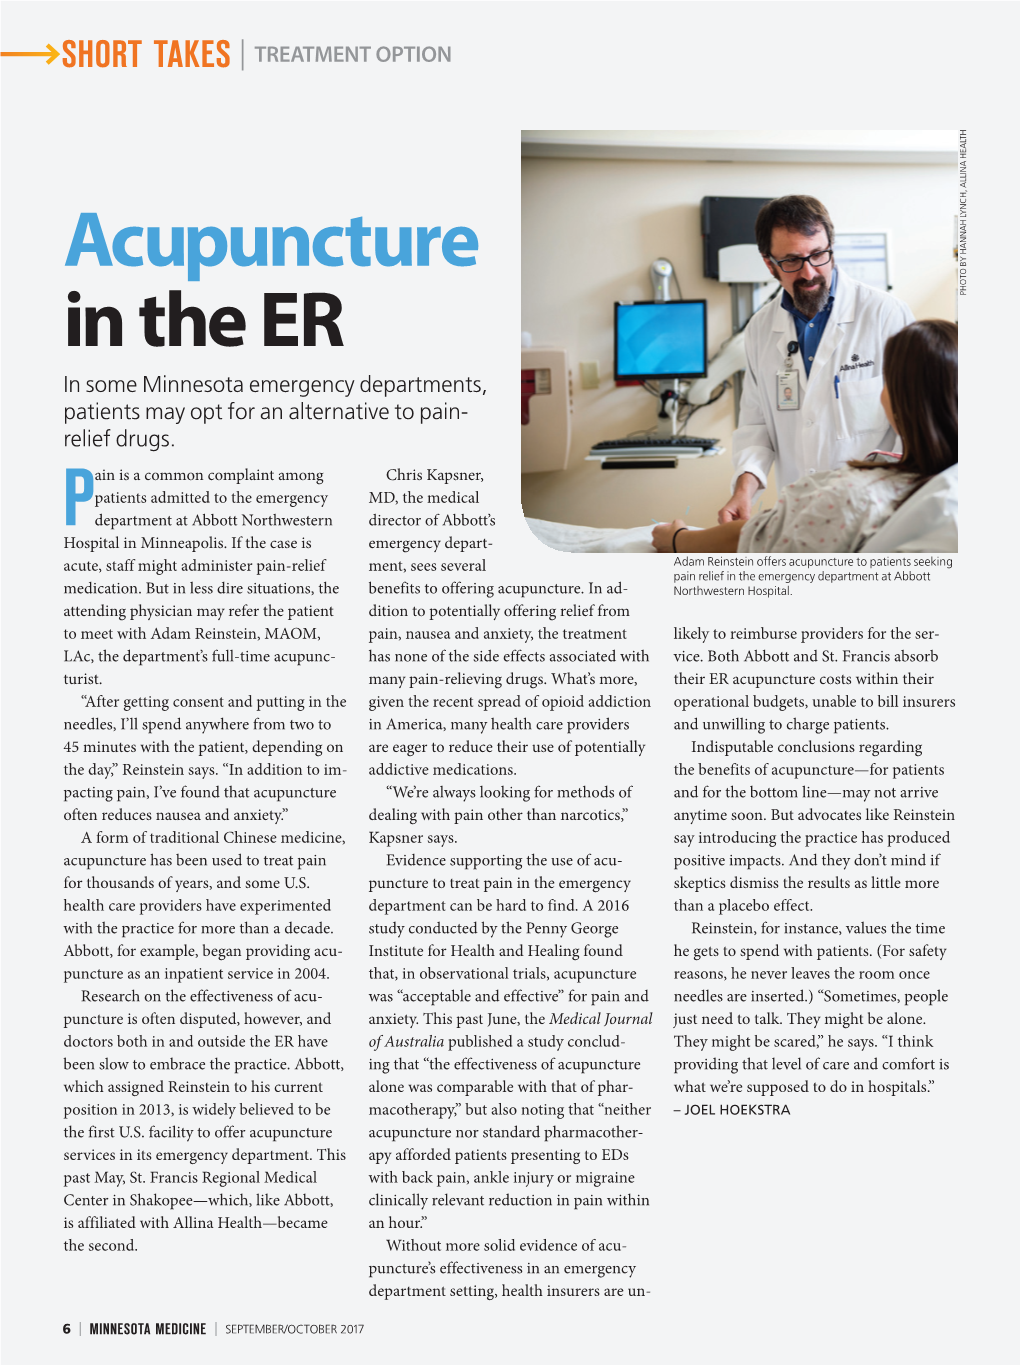 Acupuncture in the ER HEALTH ALLINA LYNCH, HANNAH by PHOTO in Some Minnesota Emergency Departments, Patients May Opt for an Alternative to Pain- Relief Drugs